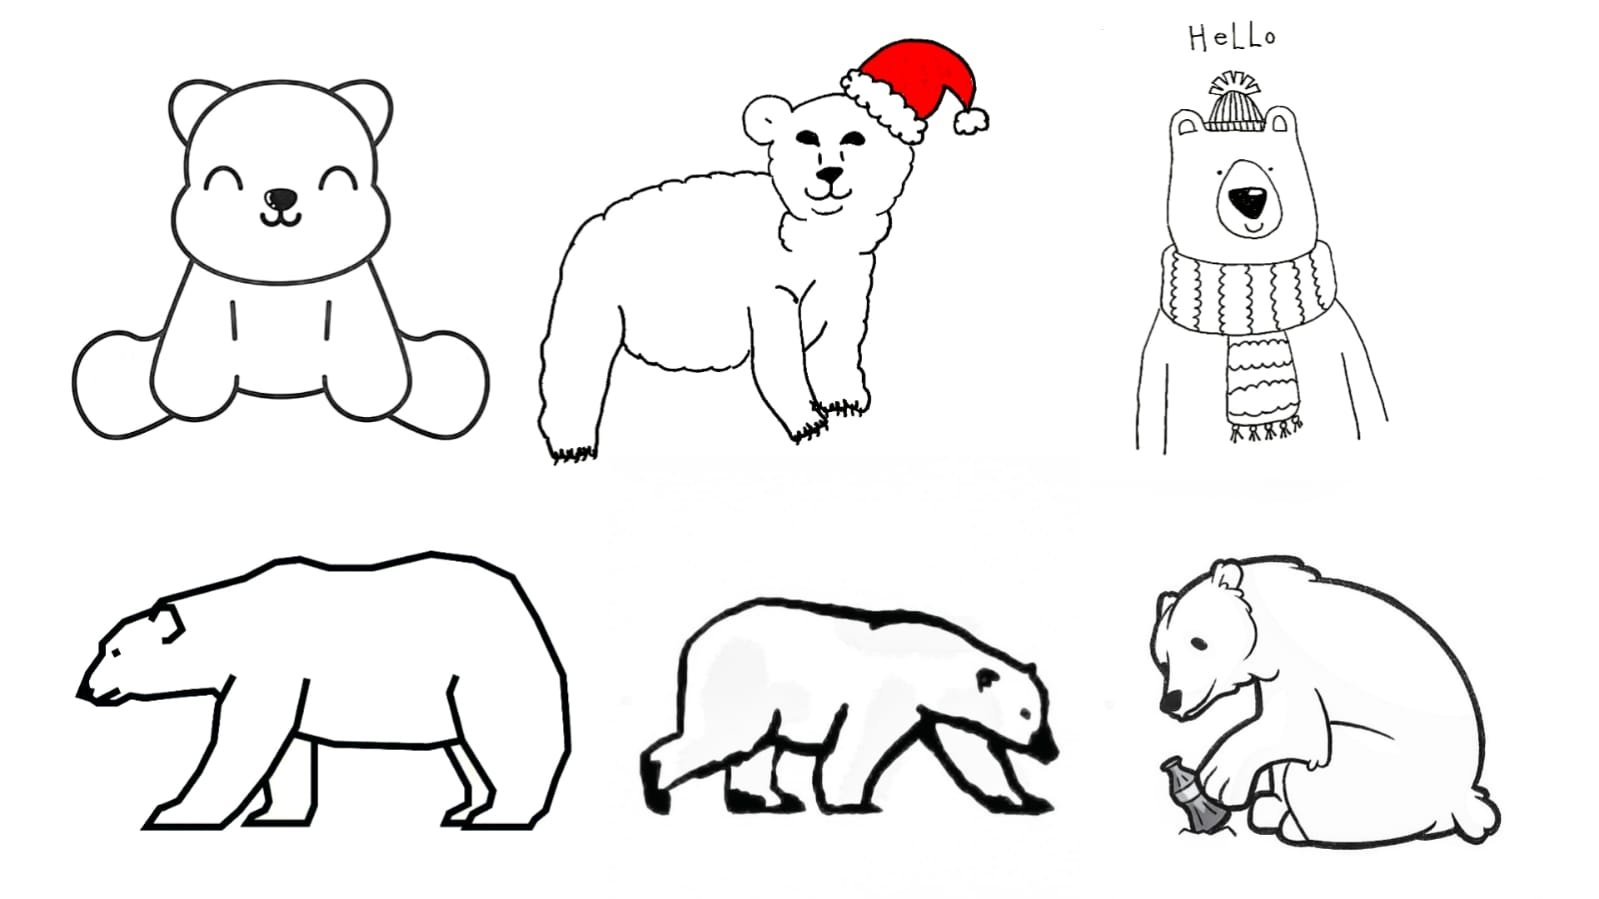 Let's Draw a Cute Valentine's Day Bear: Step-by-step Drawing Tutorial